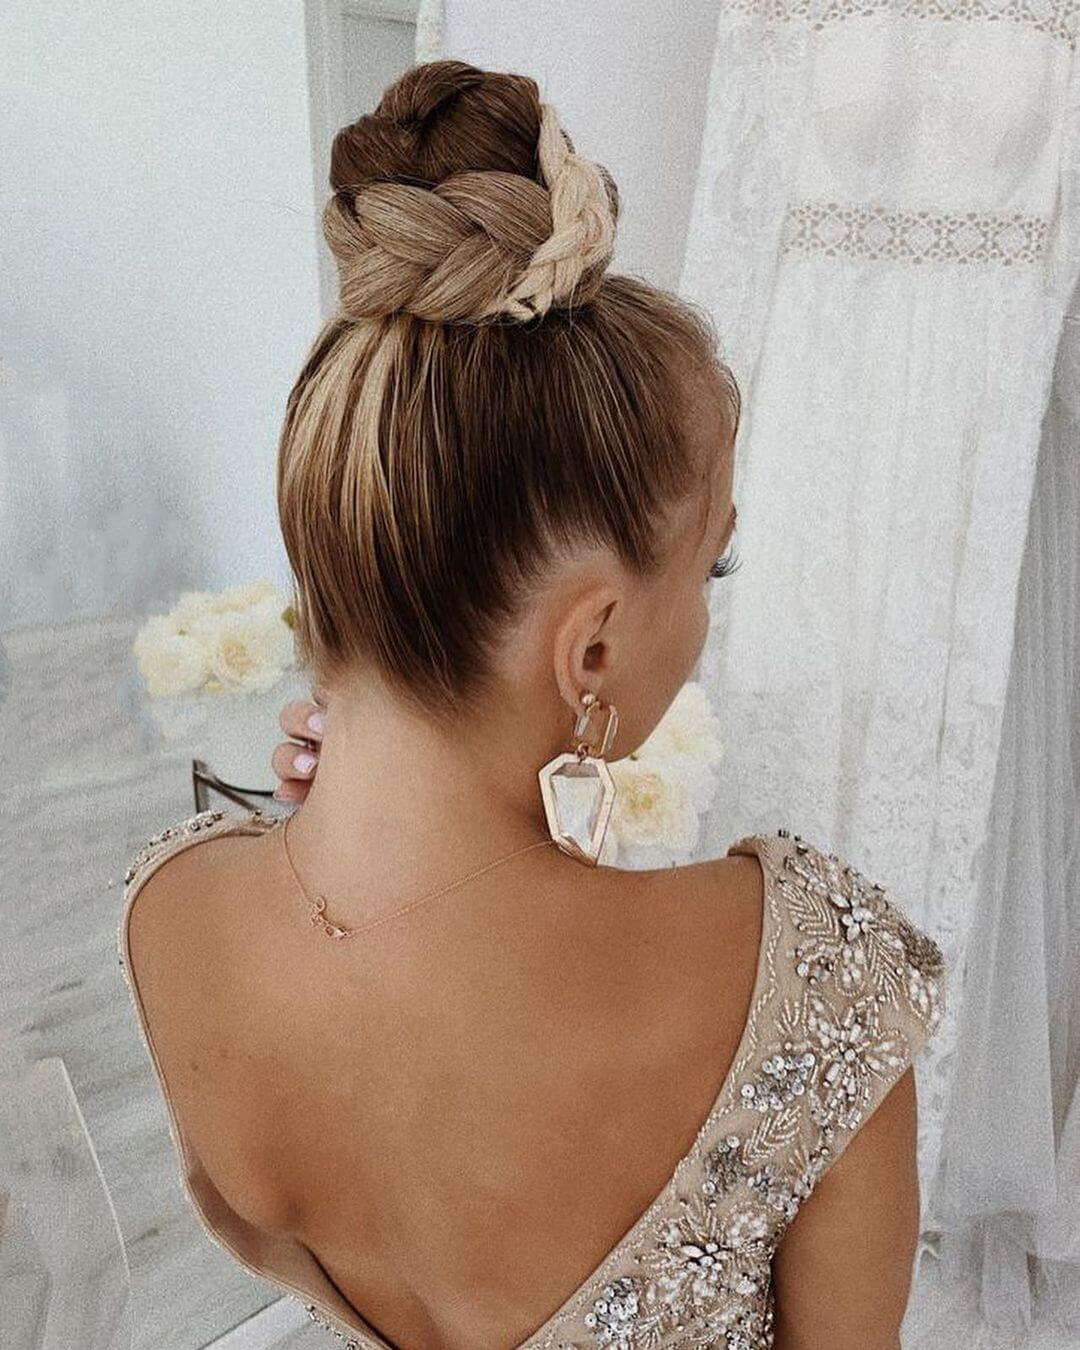 Bridesmaid Hairstyle for Young Women Its Time for a BUN!